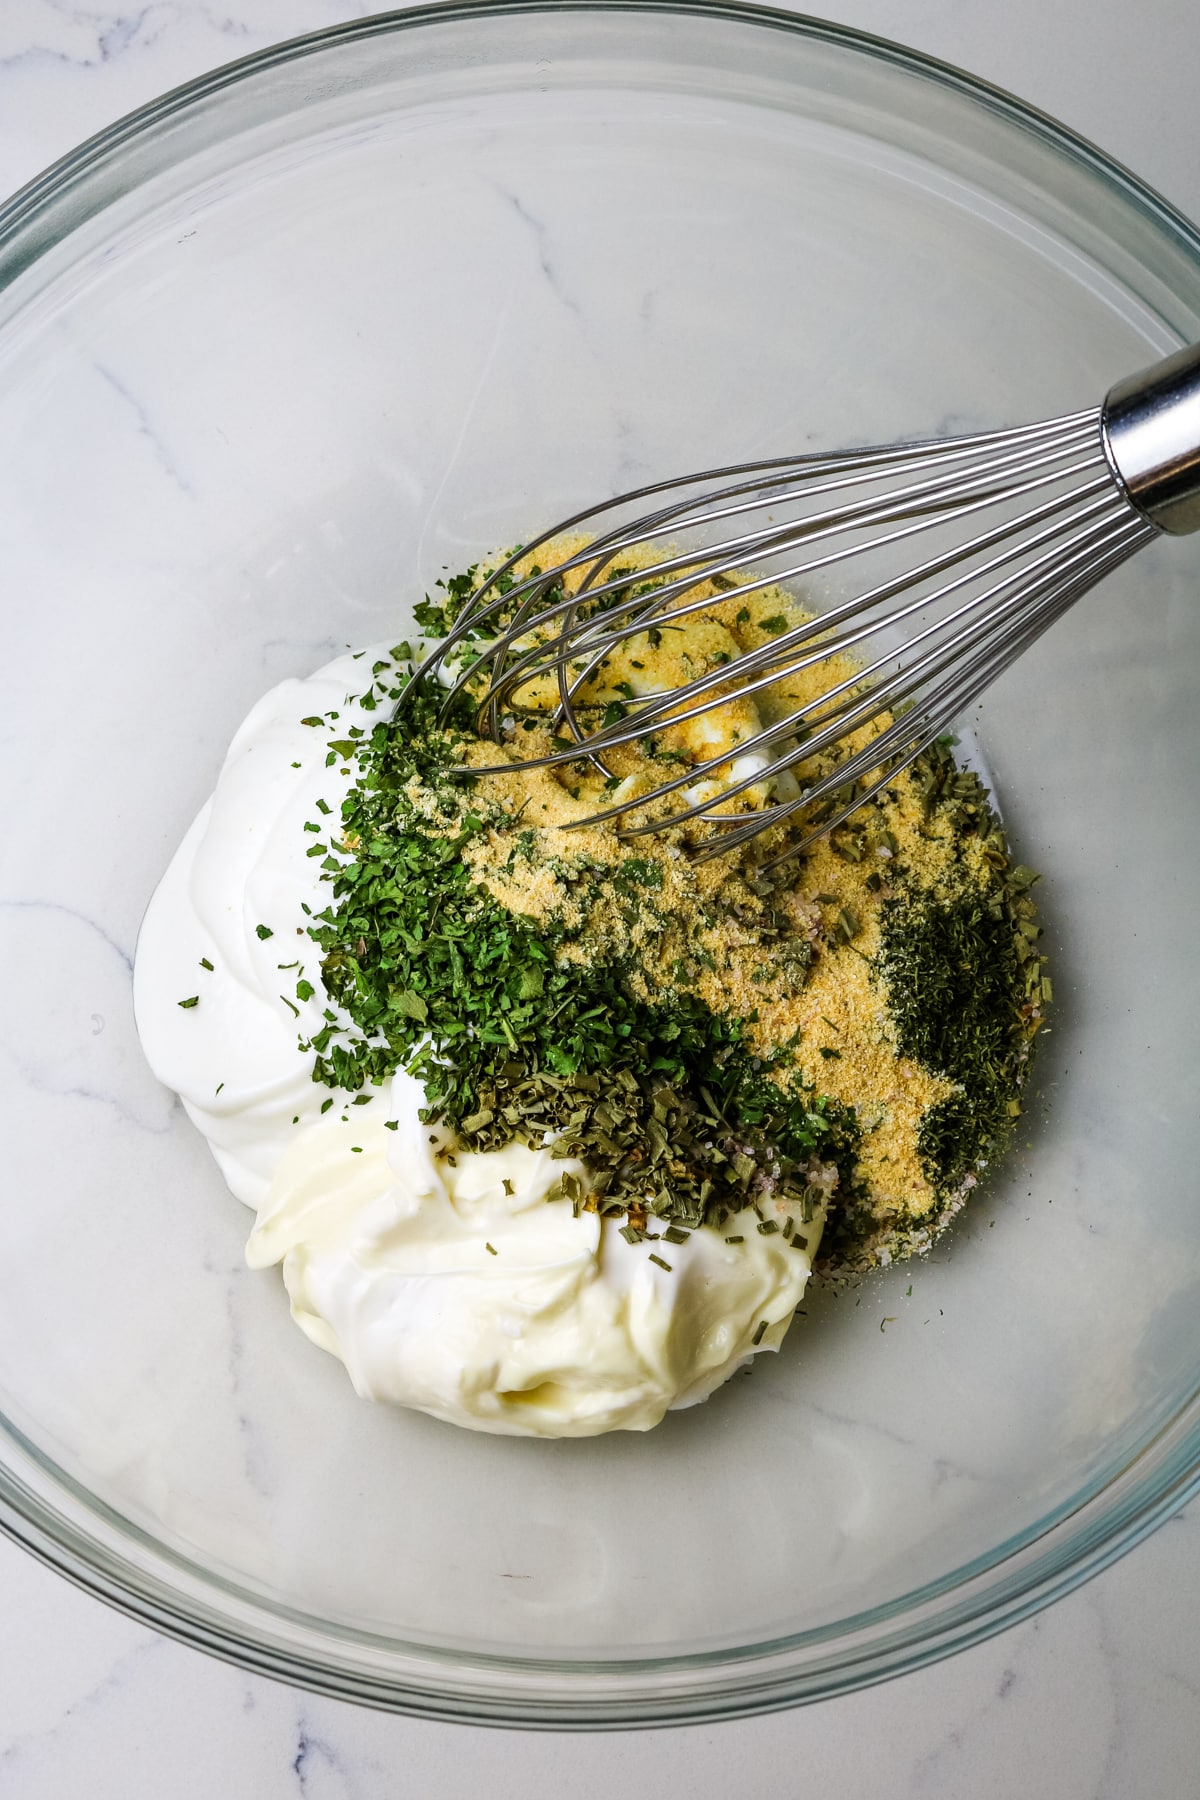 mayonnaise and Greek yogurt and dried herbs and spices in a glass mixing bowl with a whisk.